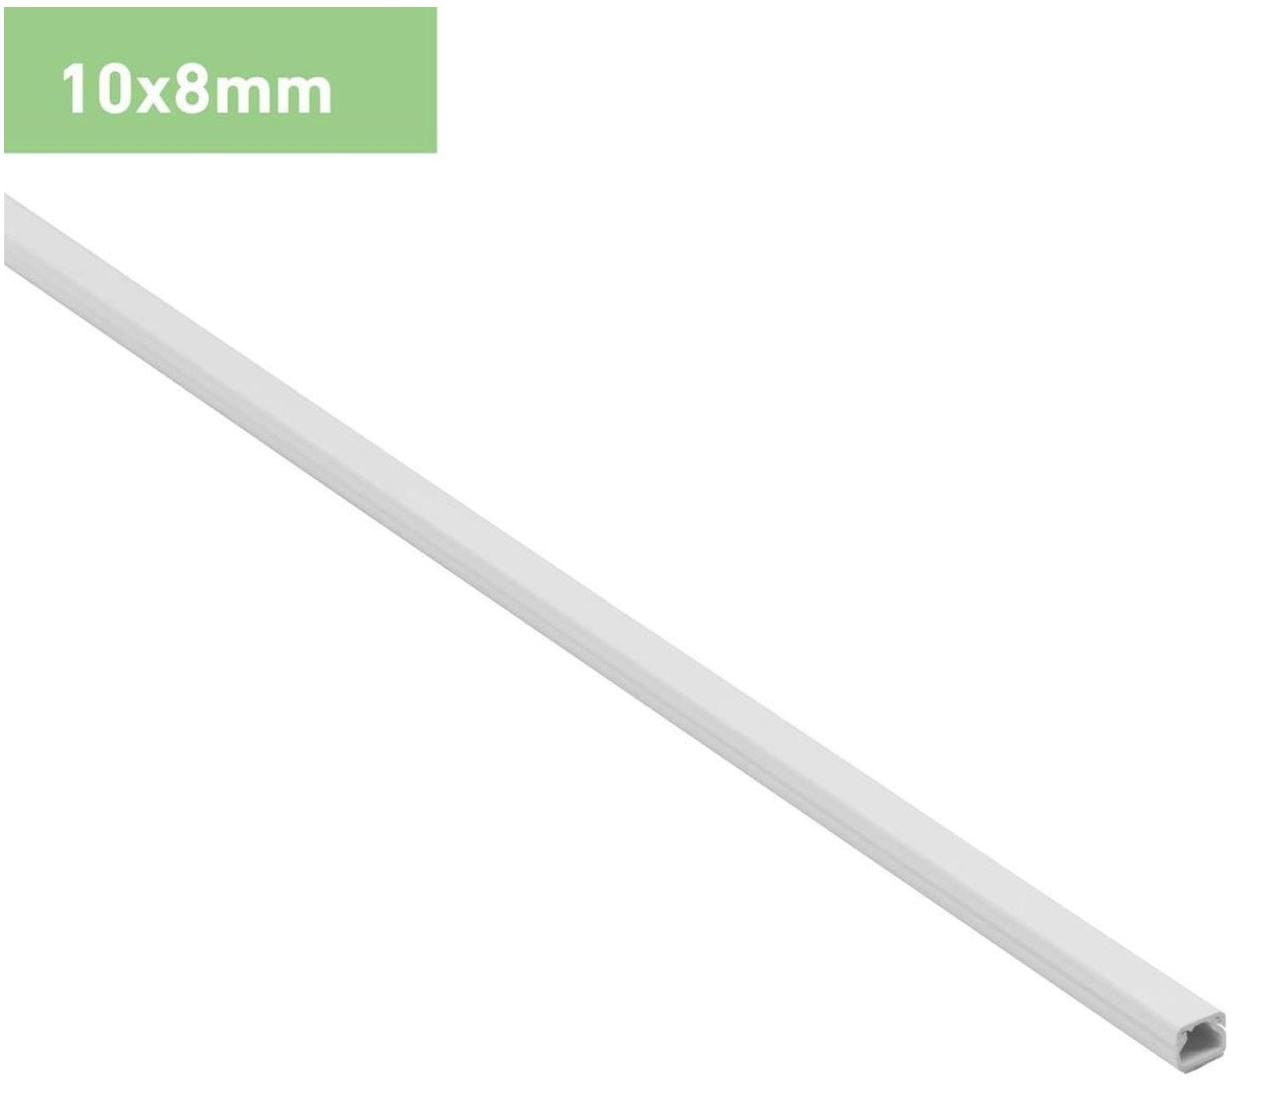 D-Line Self Adhesive Cable Trunking - White (2000 x 10 x 8mm)